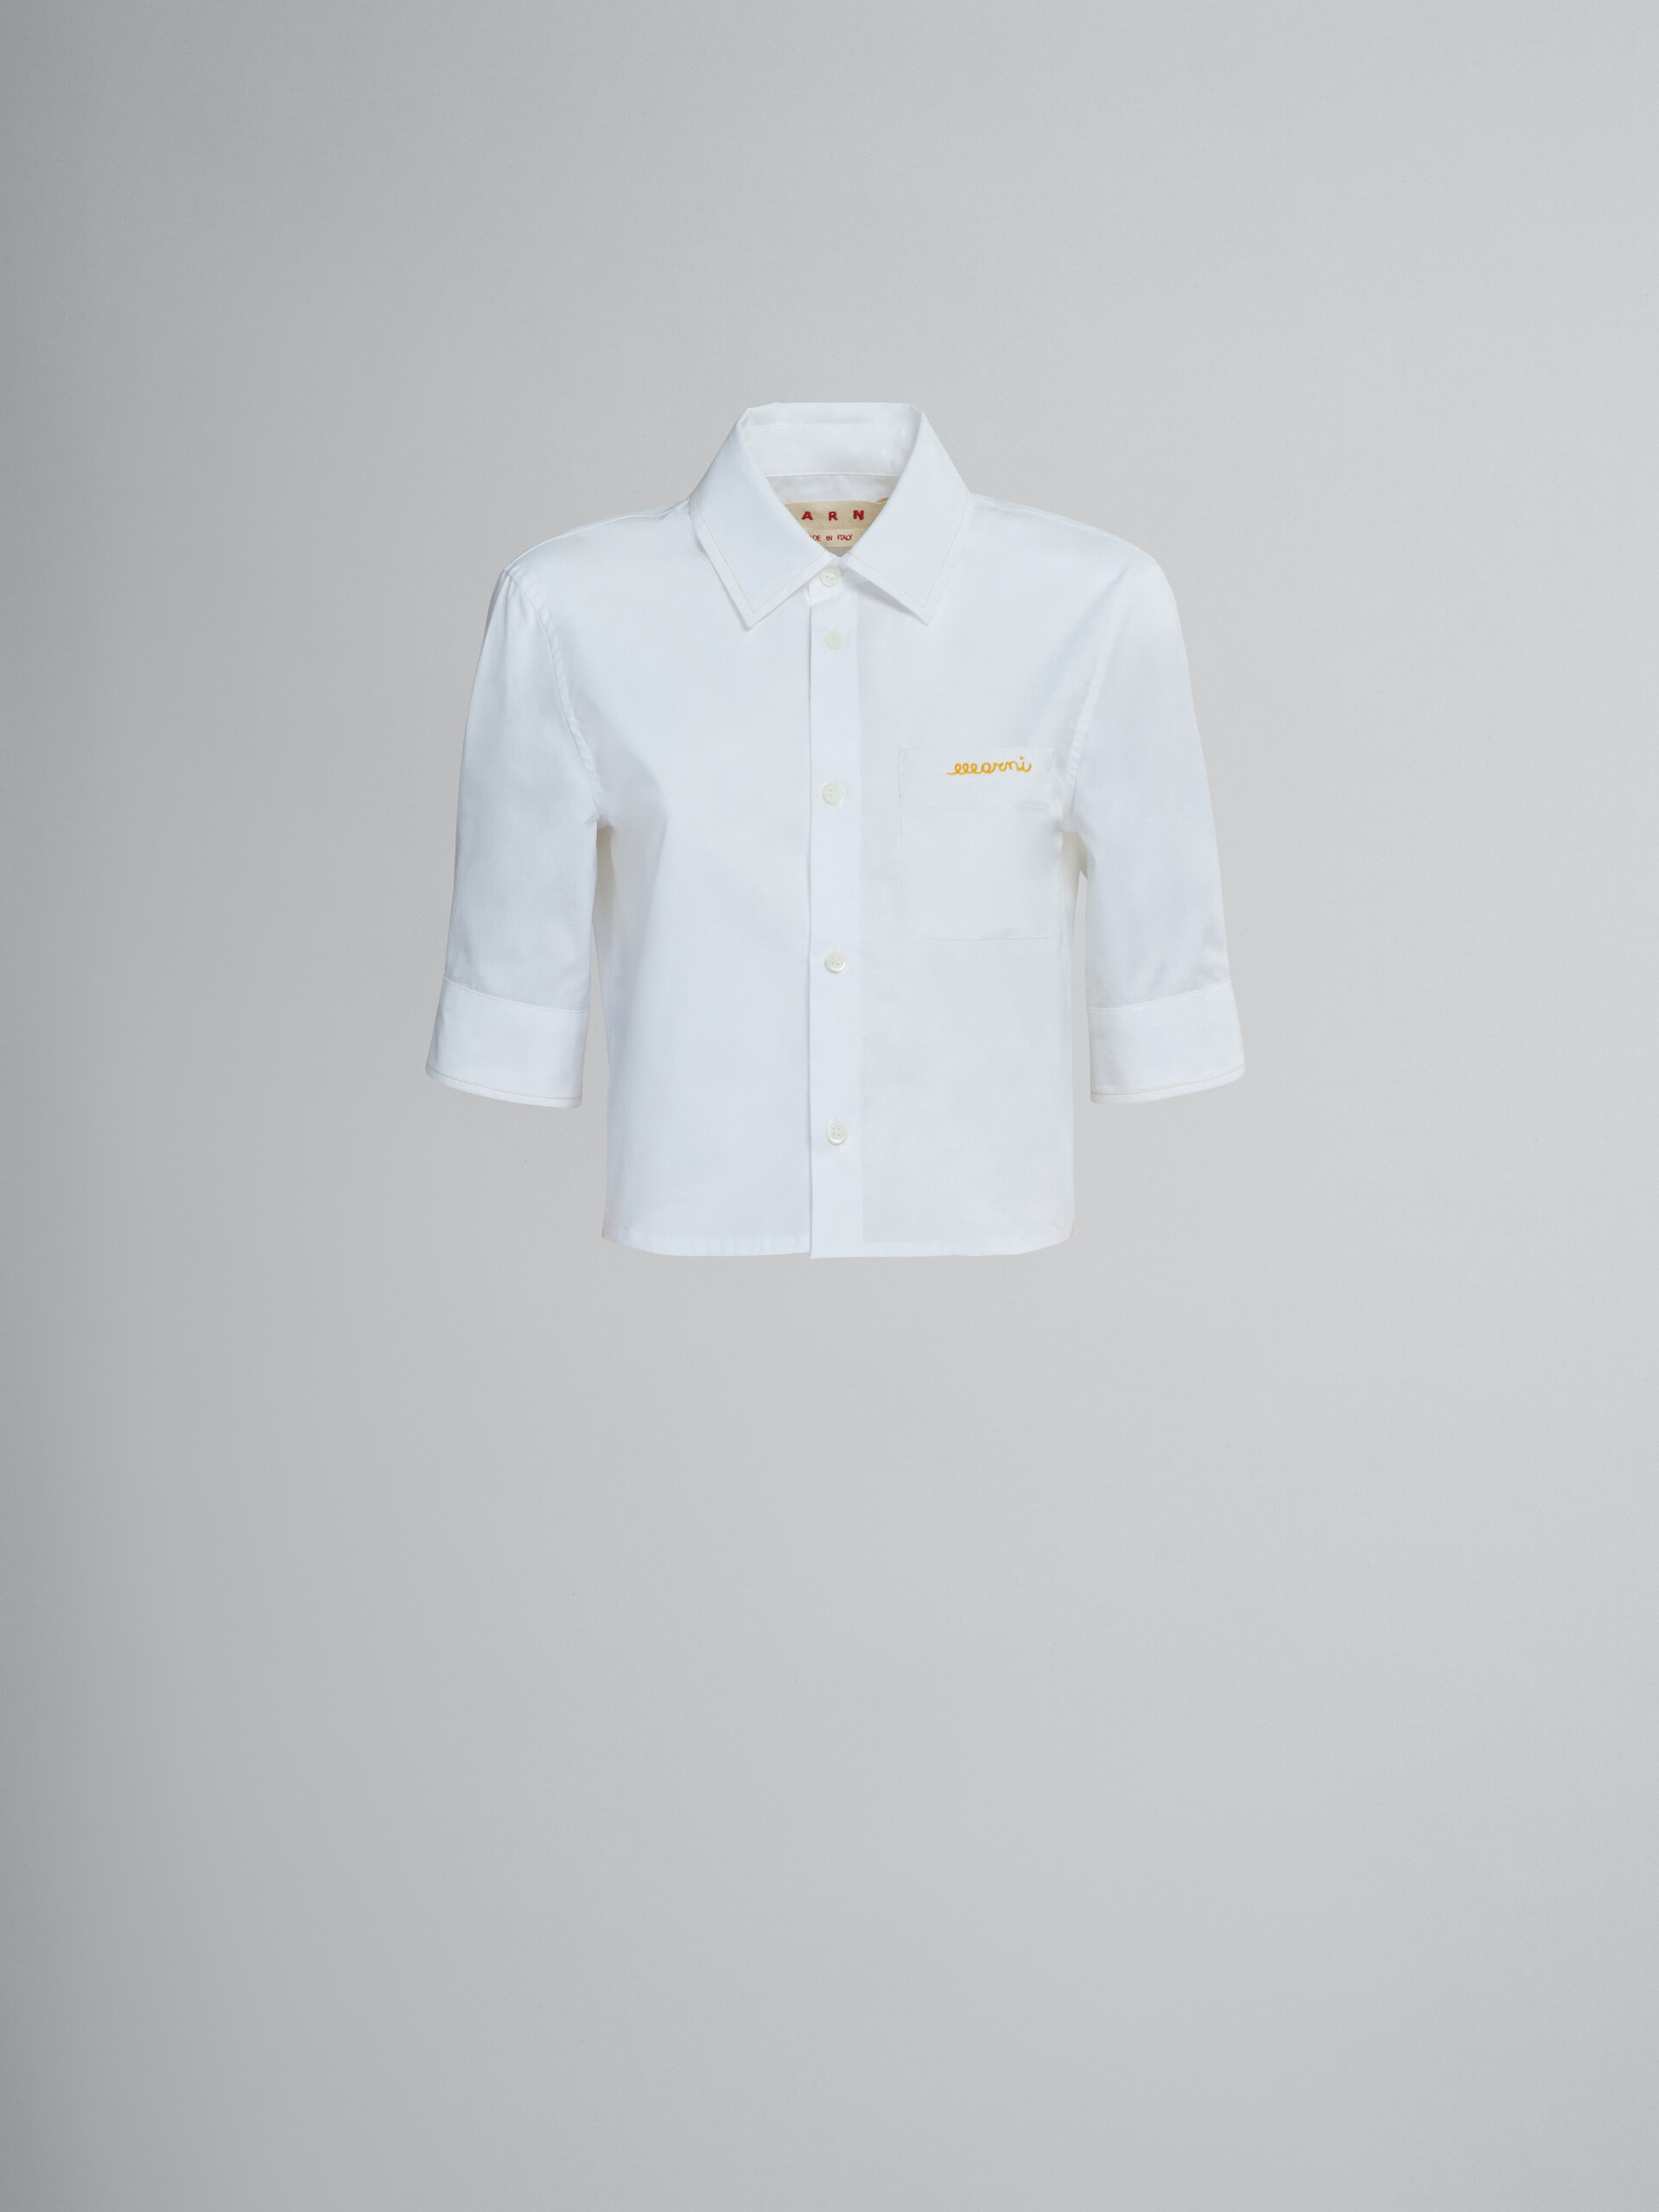 Cropped white poplin shirt with embroidered logo - Shirts - Image 1